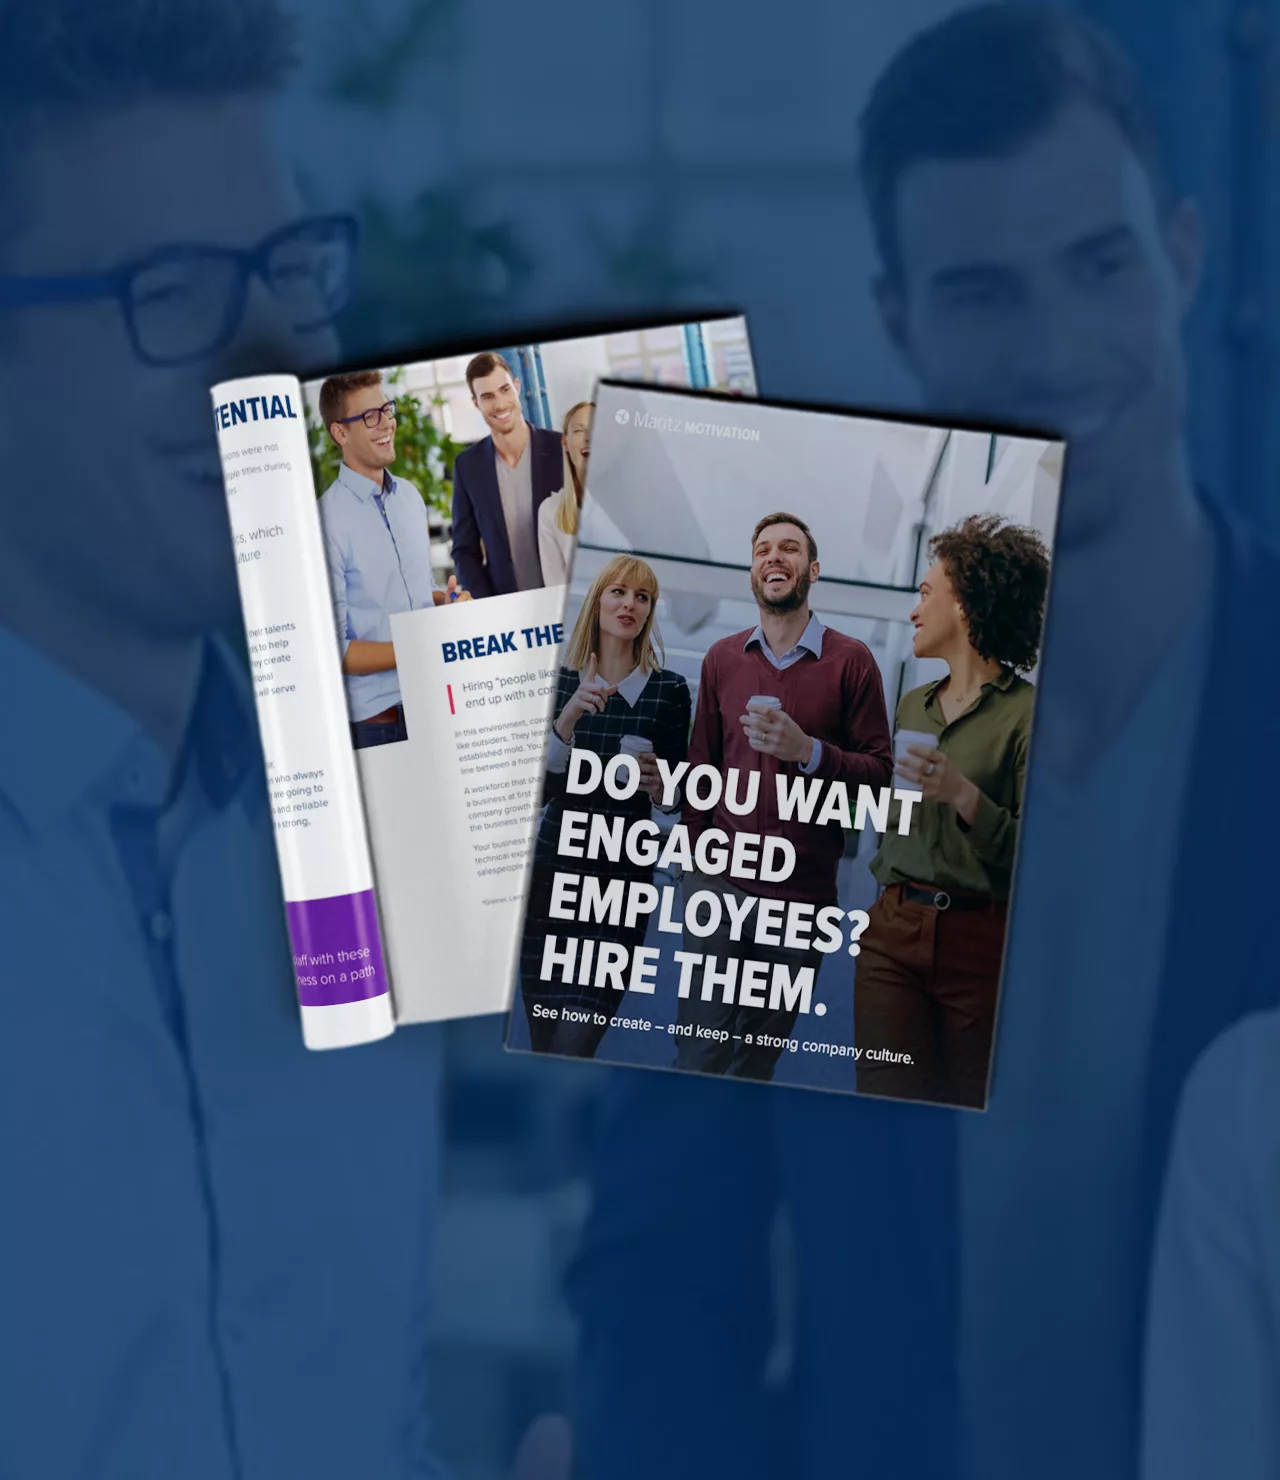 Want Engaged Employees? Hire Them